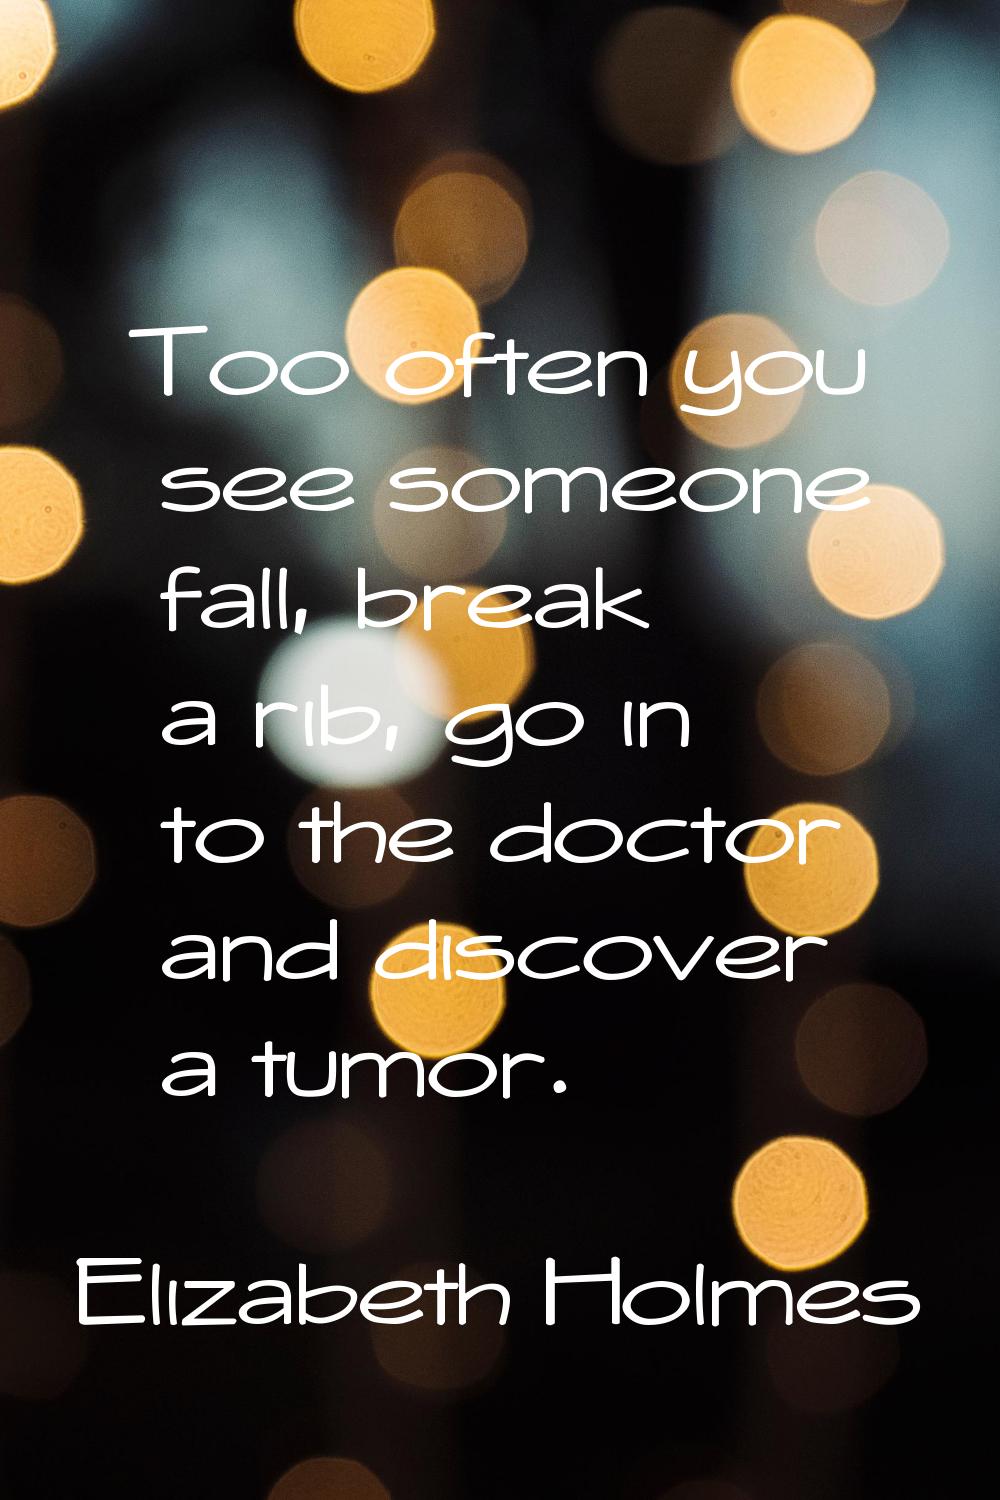 Too often you see someone fall, break a rib, go in to the doctor and discover a tumor.